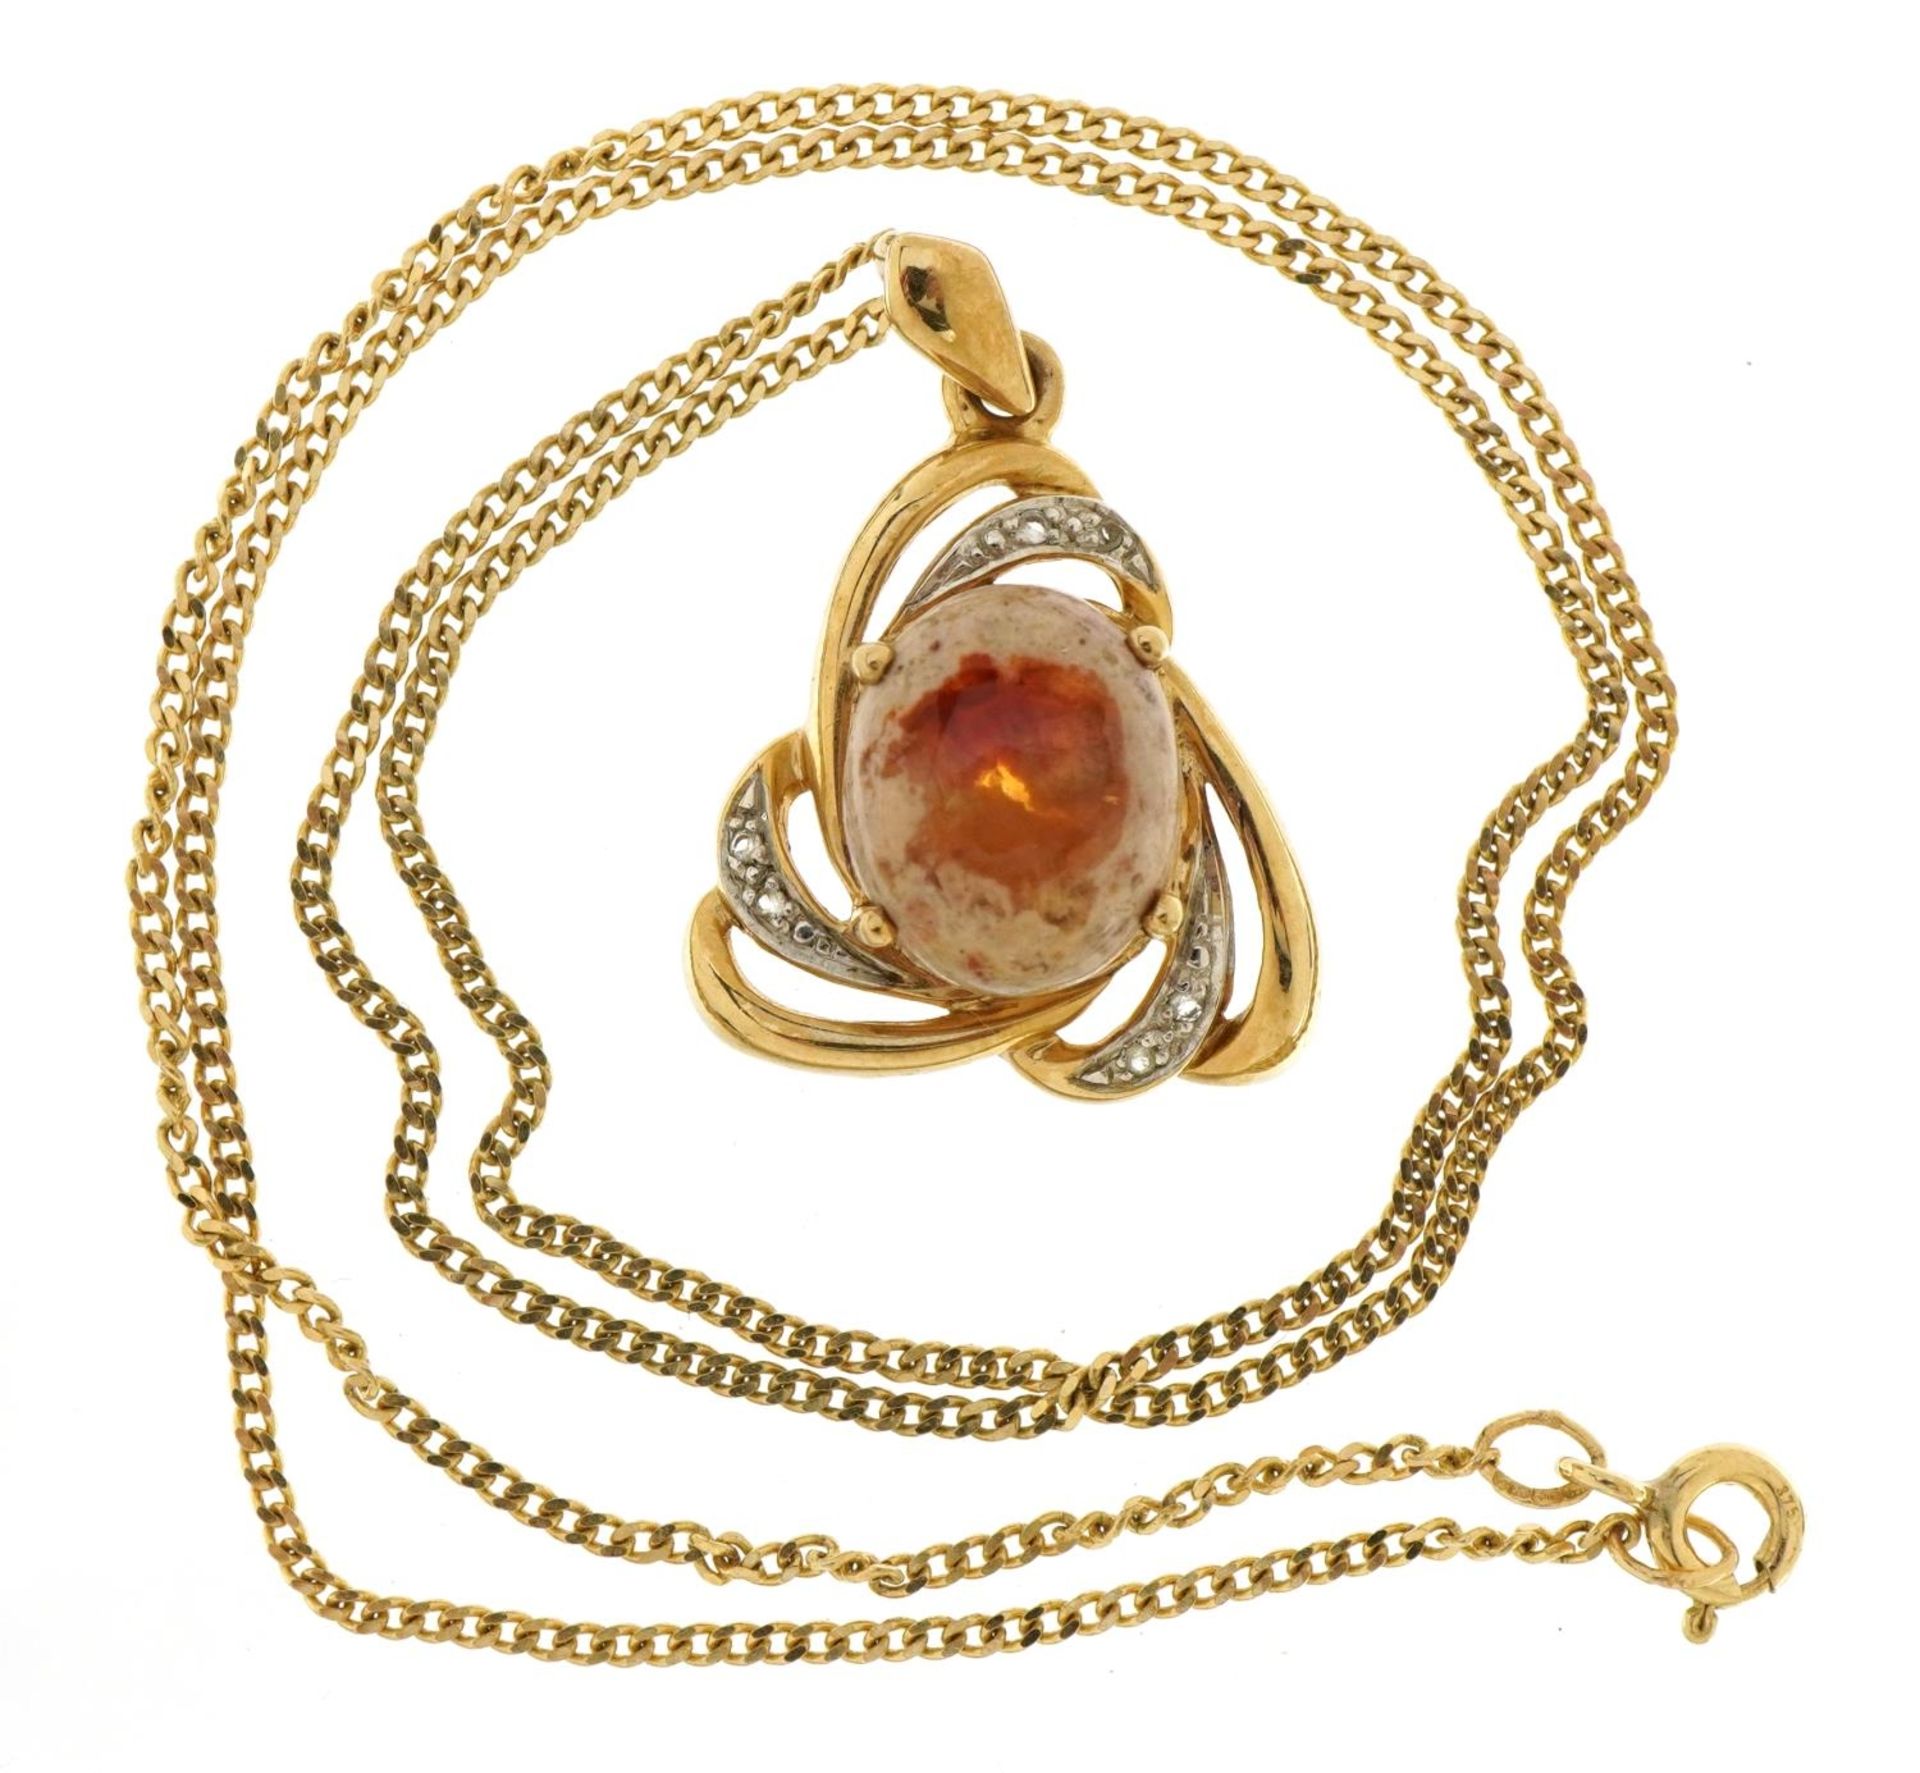 9ct two tone gold cabochon orange stone pendant set with clear stones on a 9ct gold curb link - Image 2 of 4